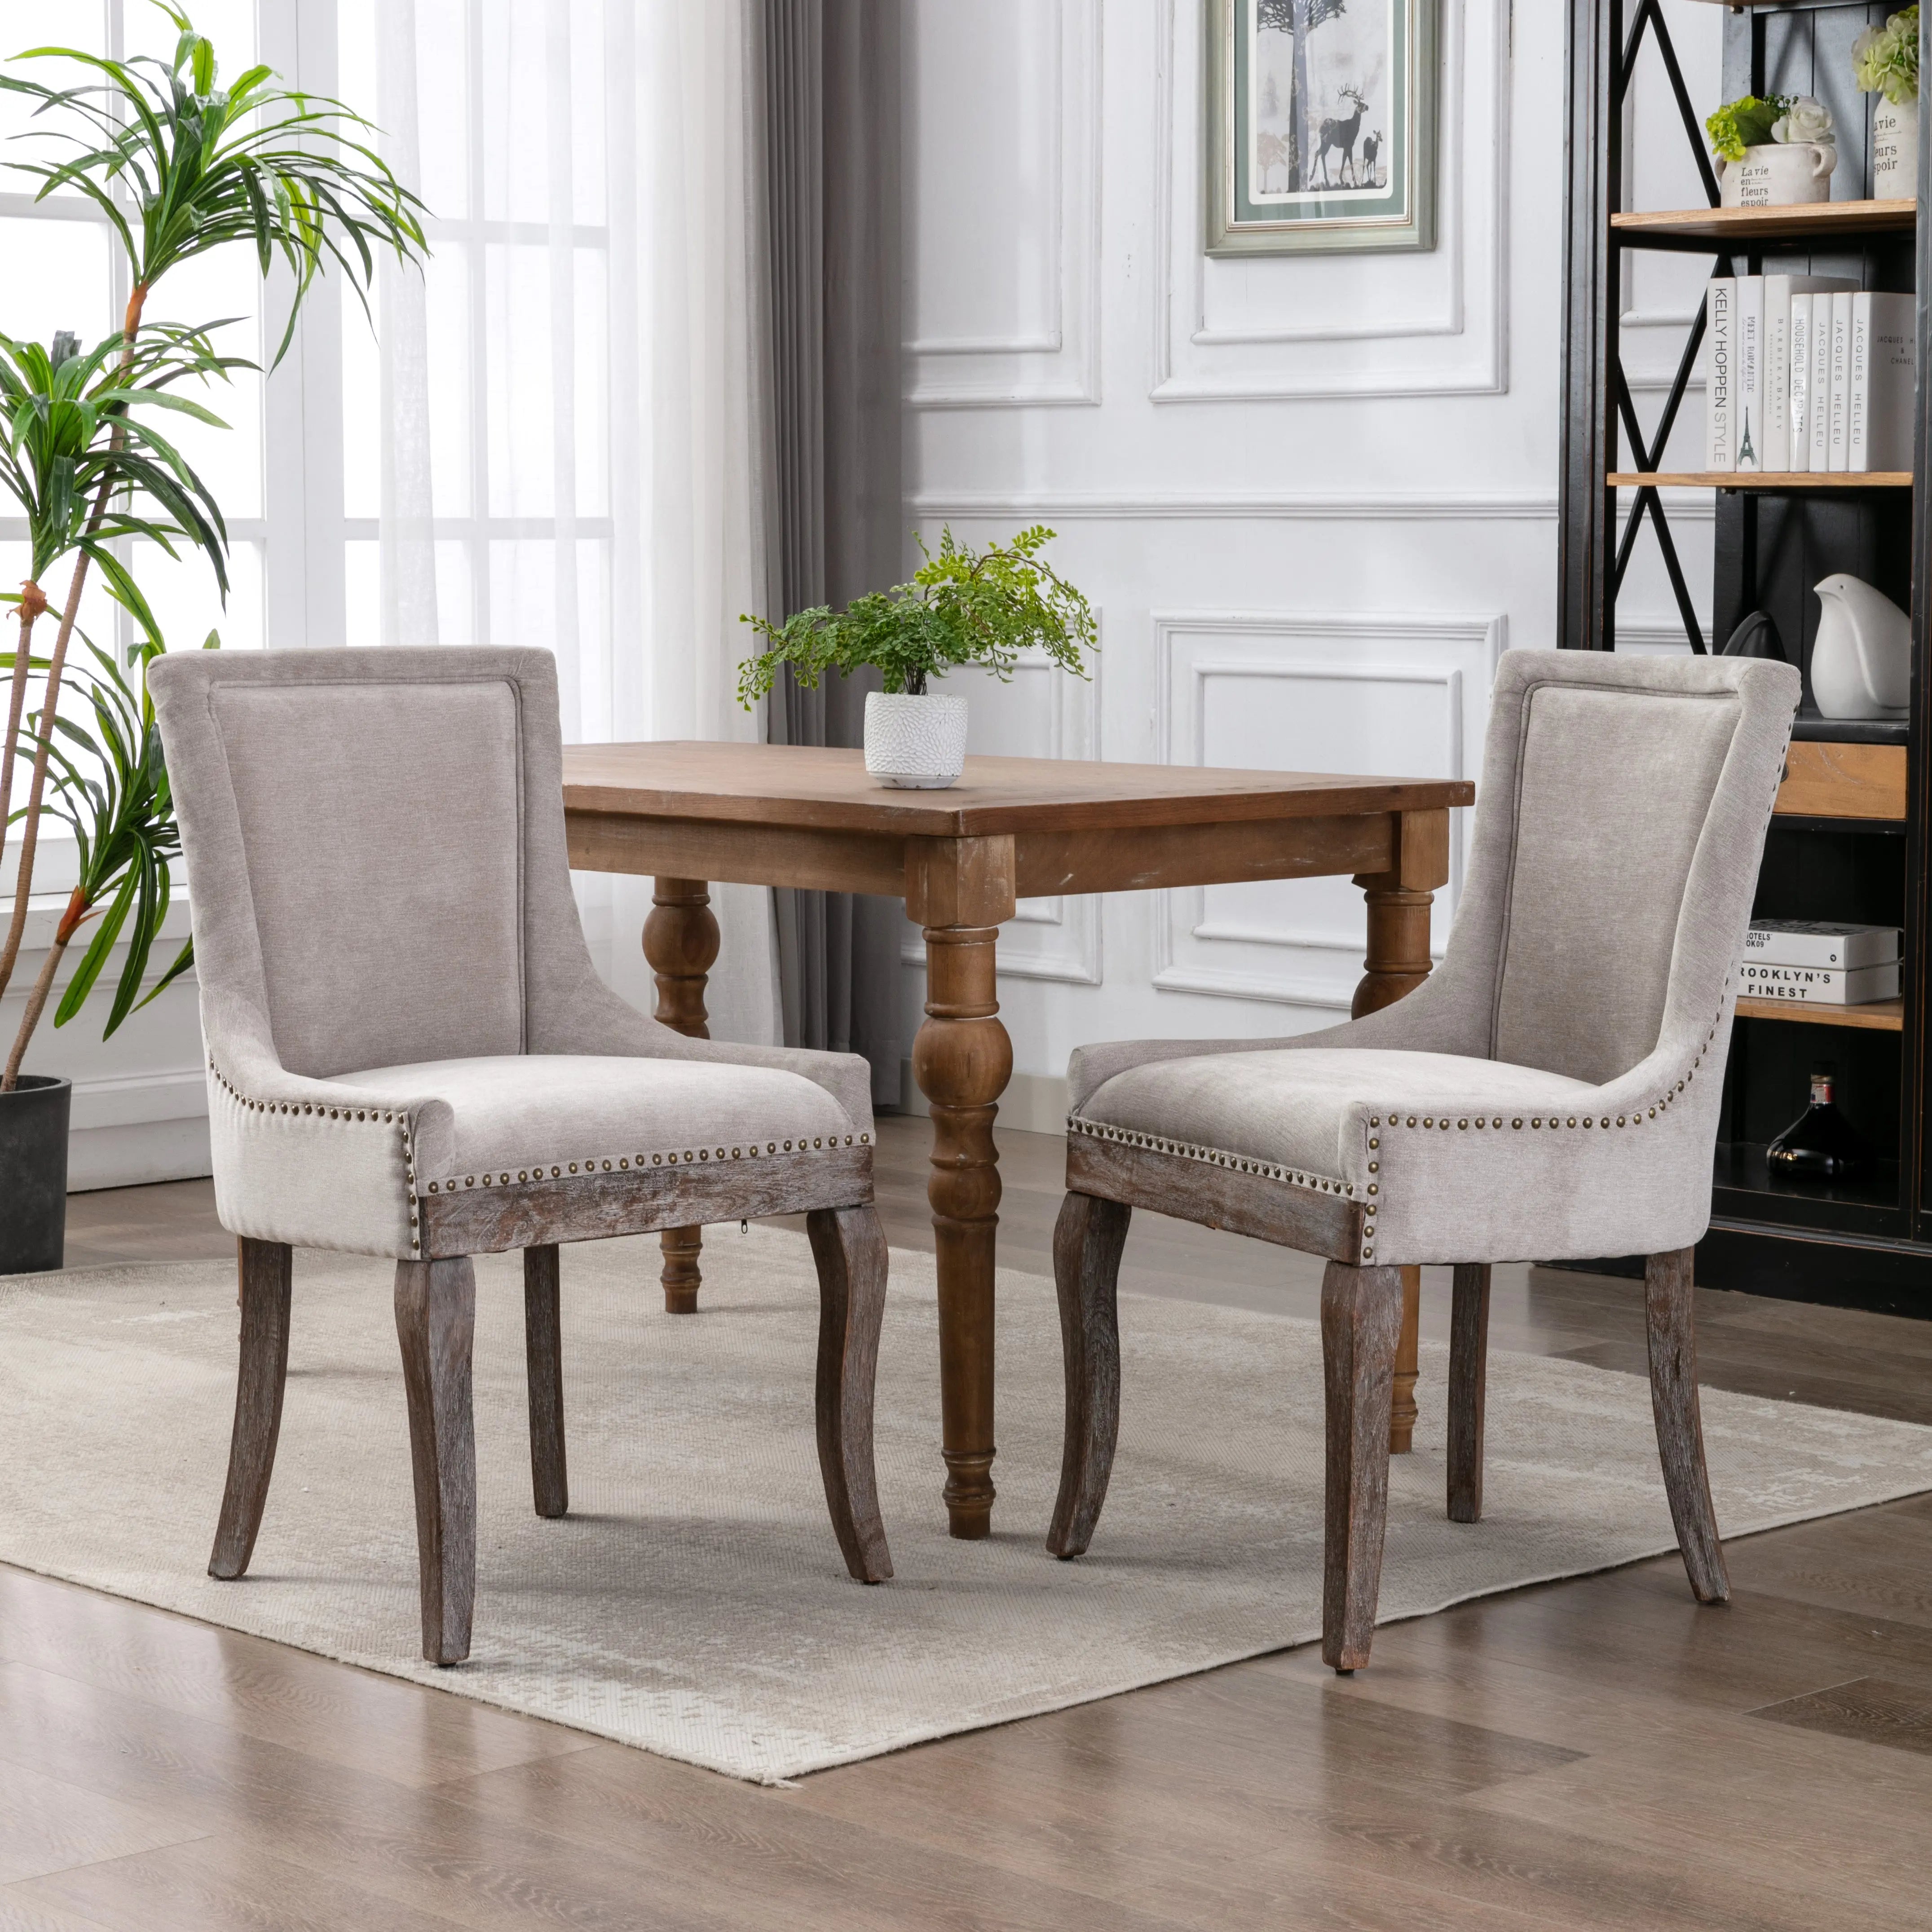 Set of 2 Dining Chairs-Beige Aaden Furniture